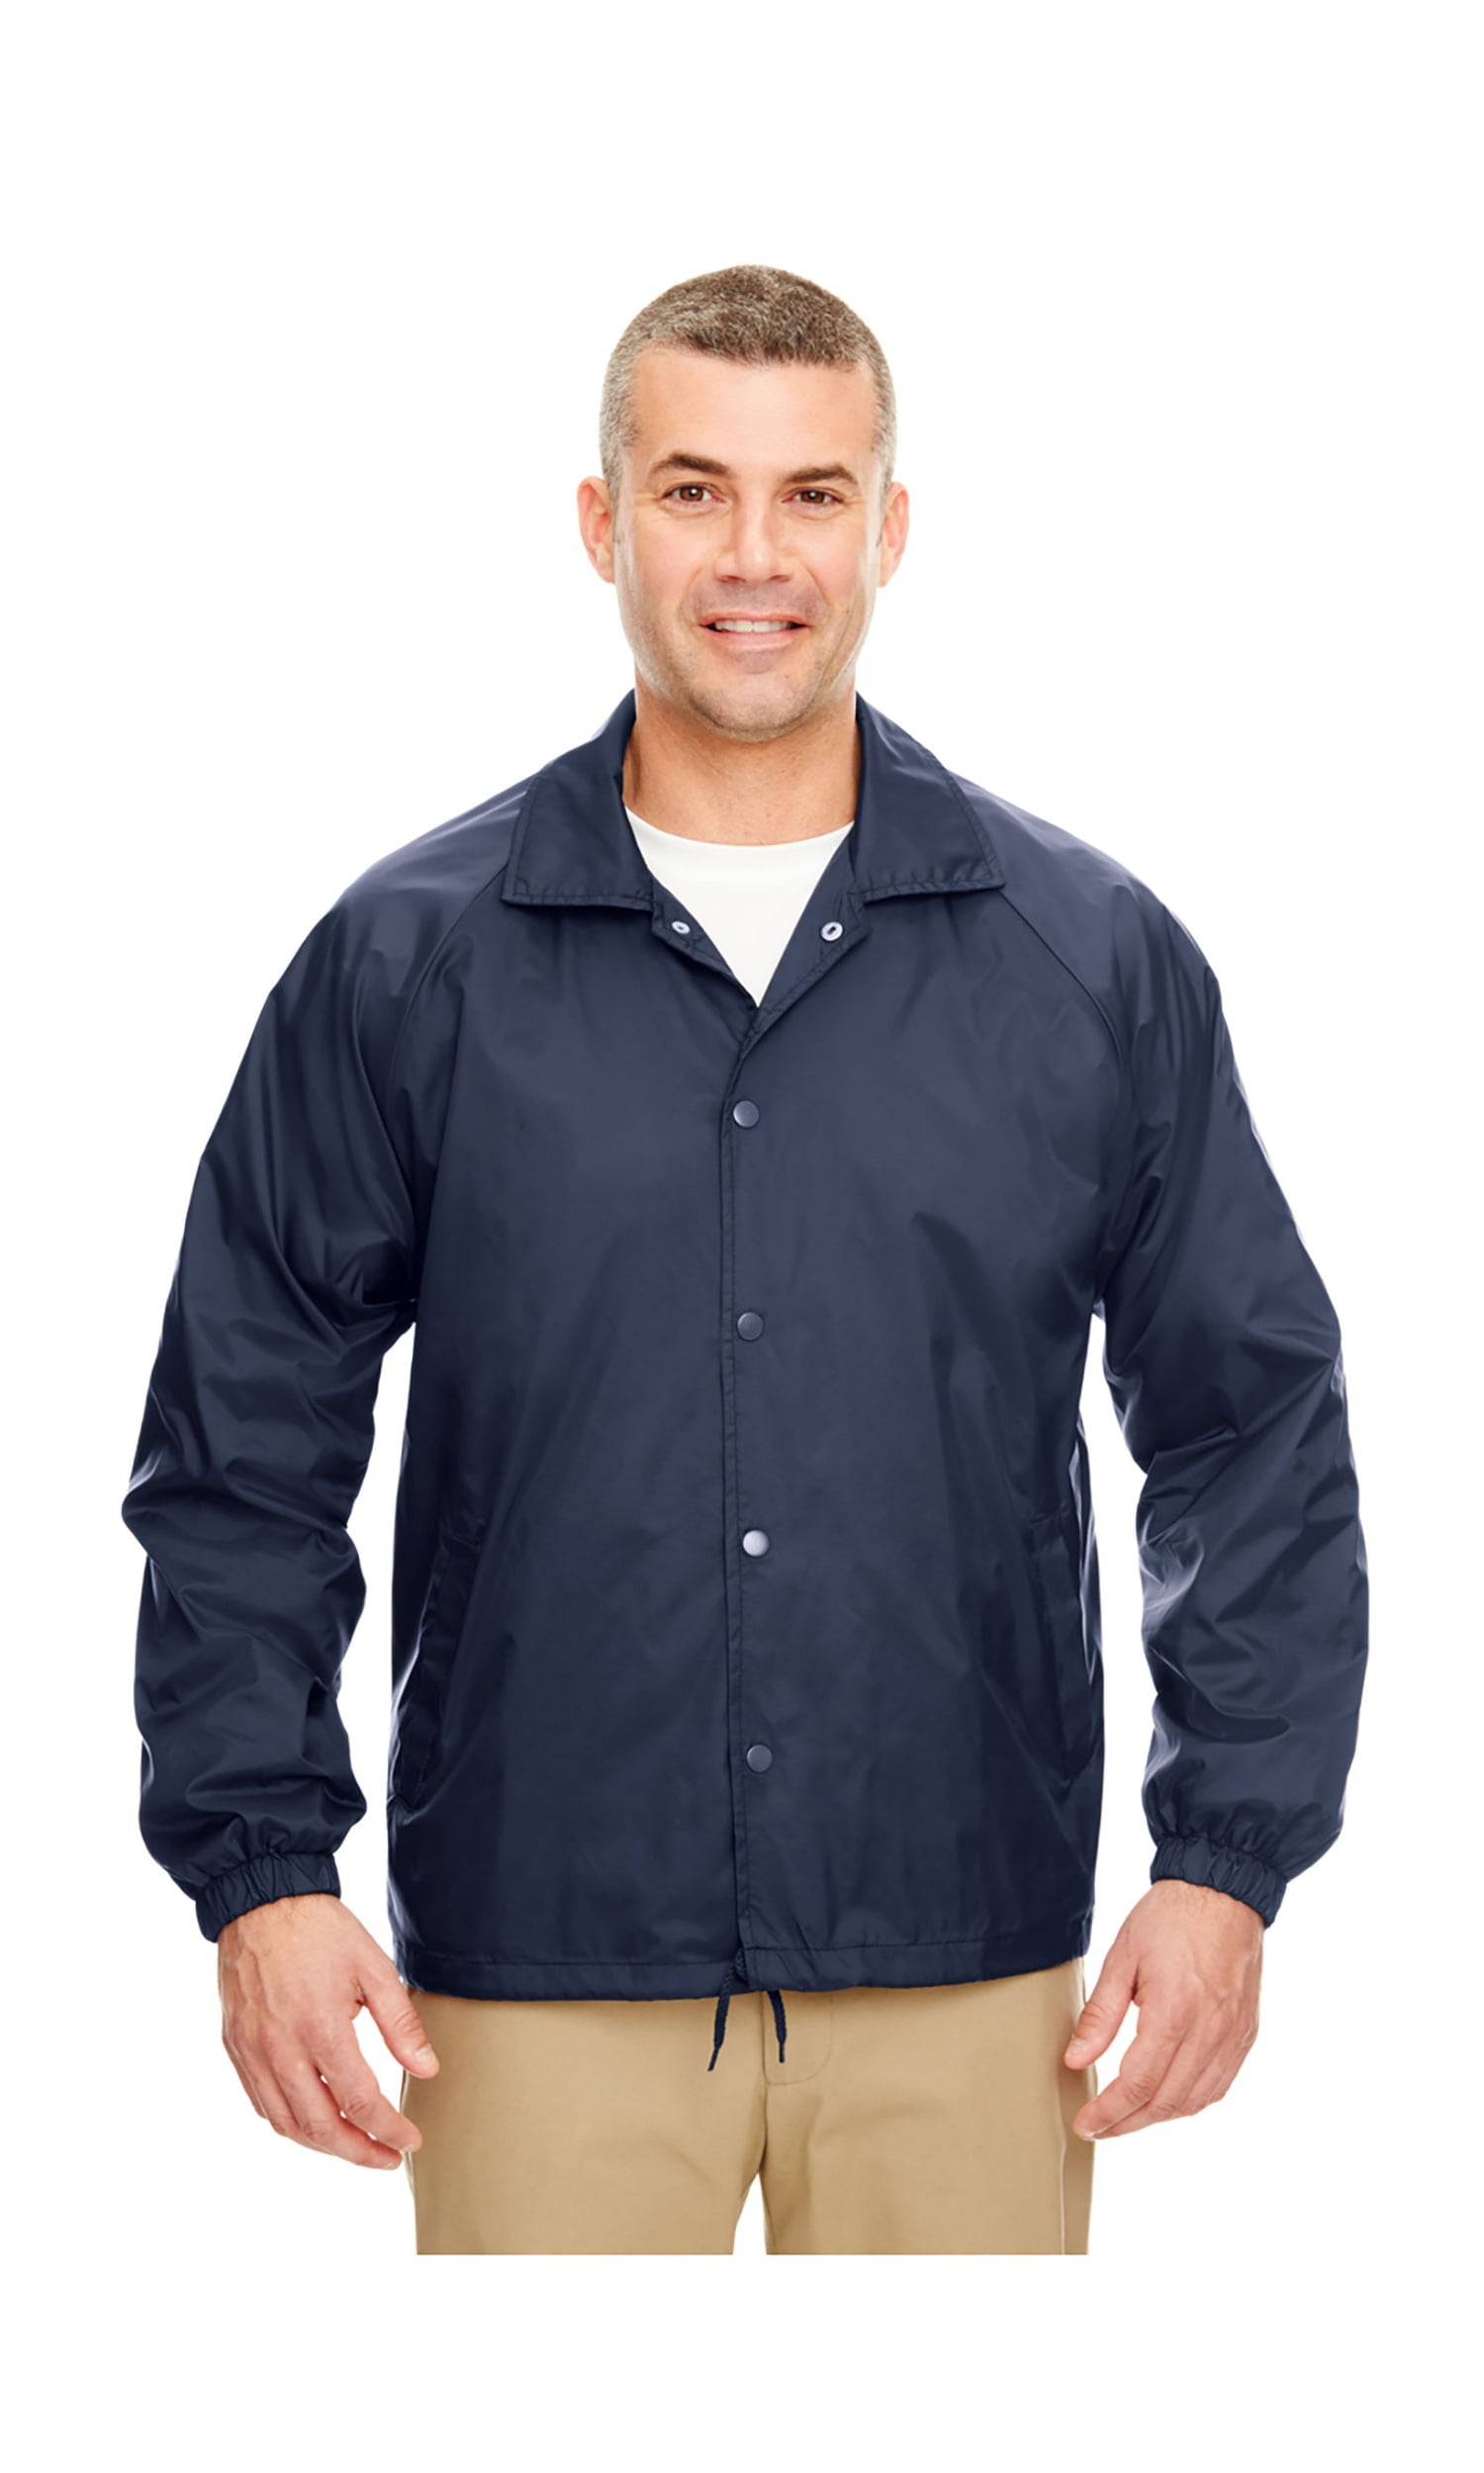 Ultraclub Men'S Durable Wind Resistant Brushed Coaches Jacket 